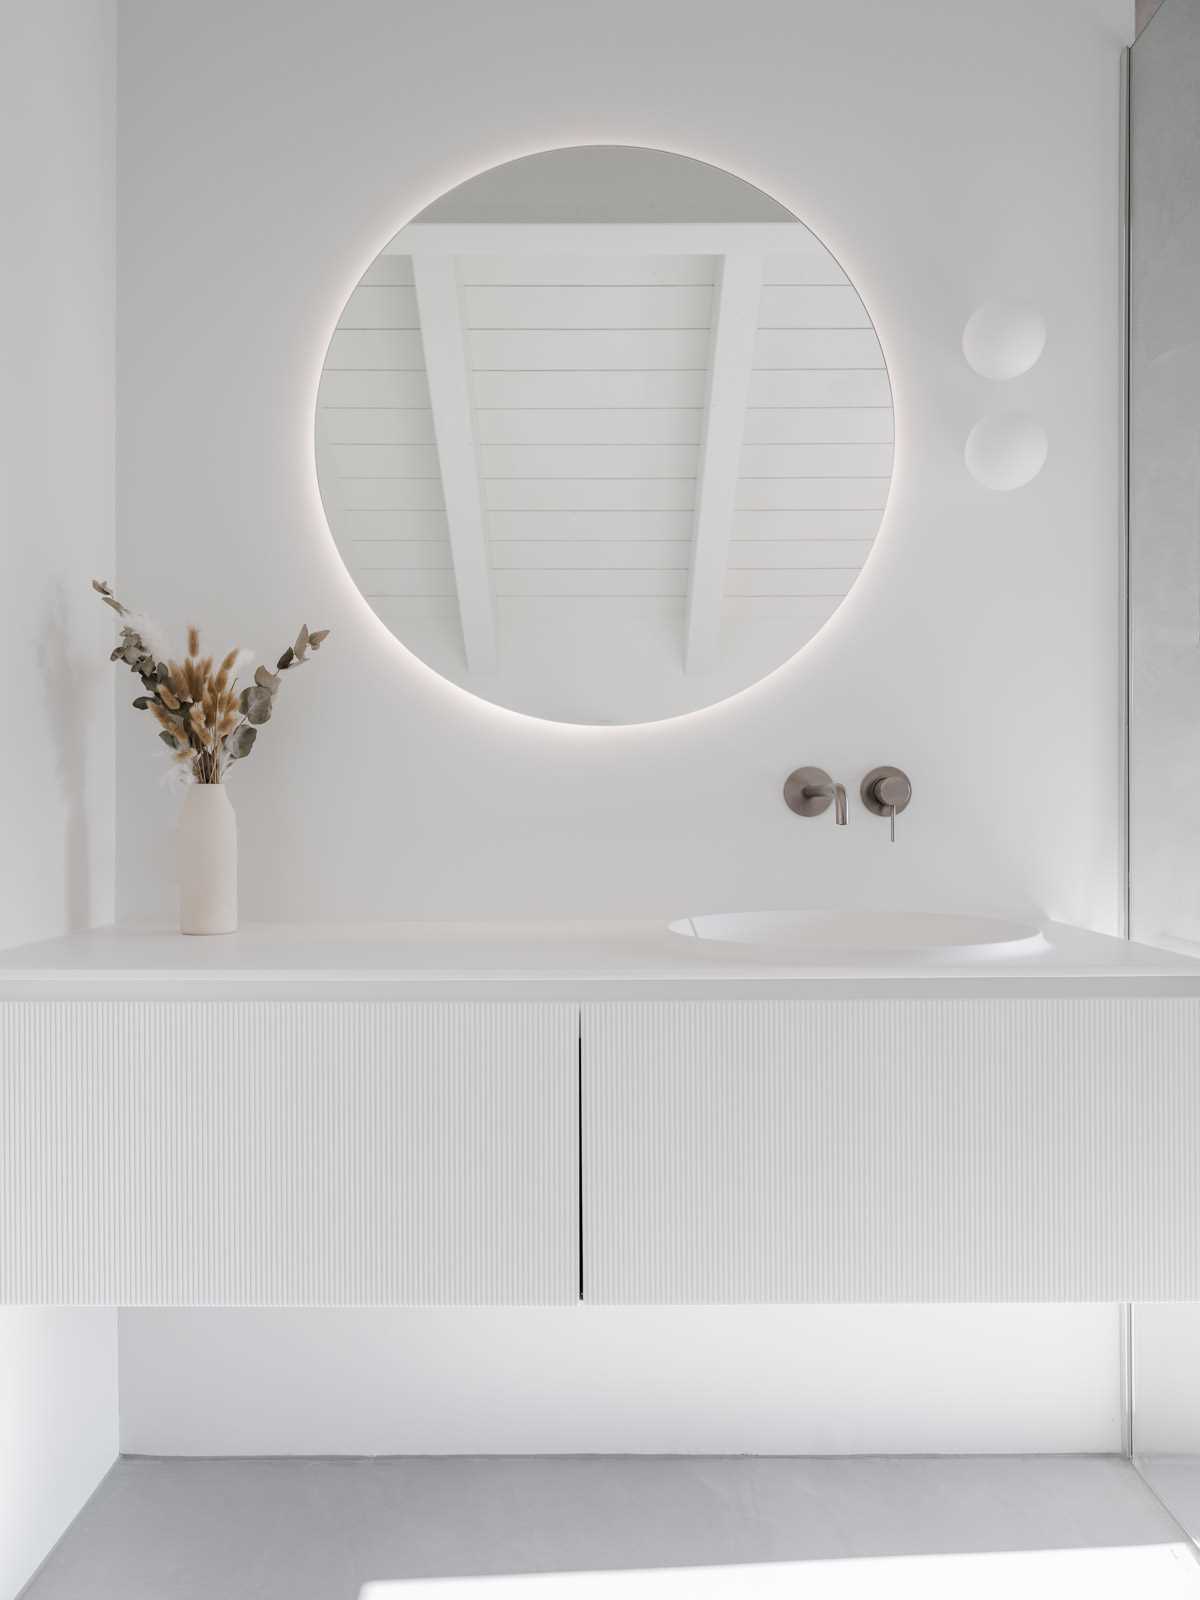 In this modern bathroom, there's a round backlit mirror mounted on the wall above a white vanity with a textured front. Next to the vanity area is the shower which includes a shelving niche.